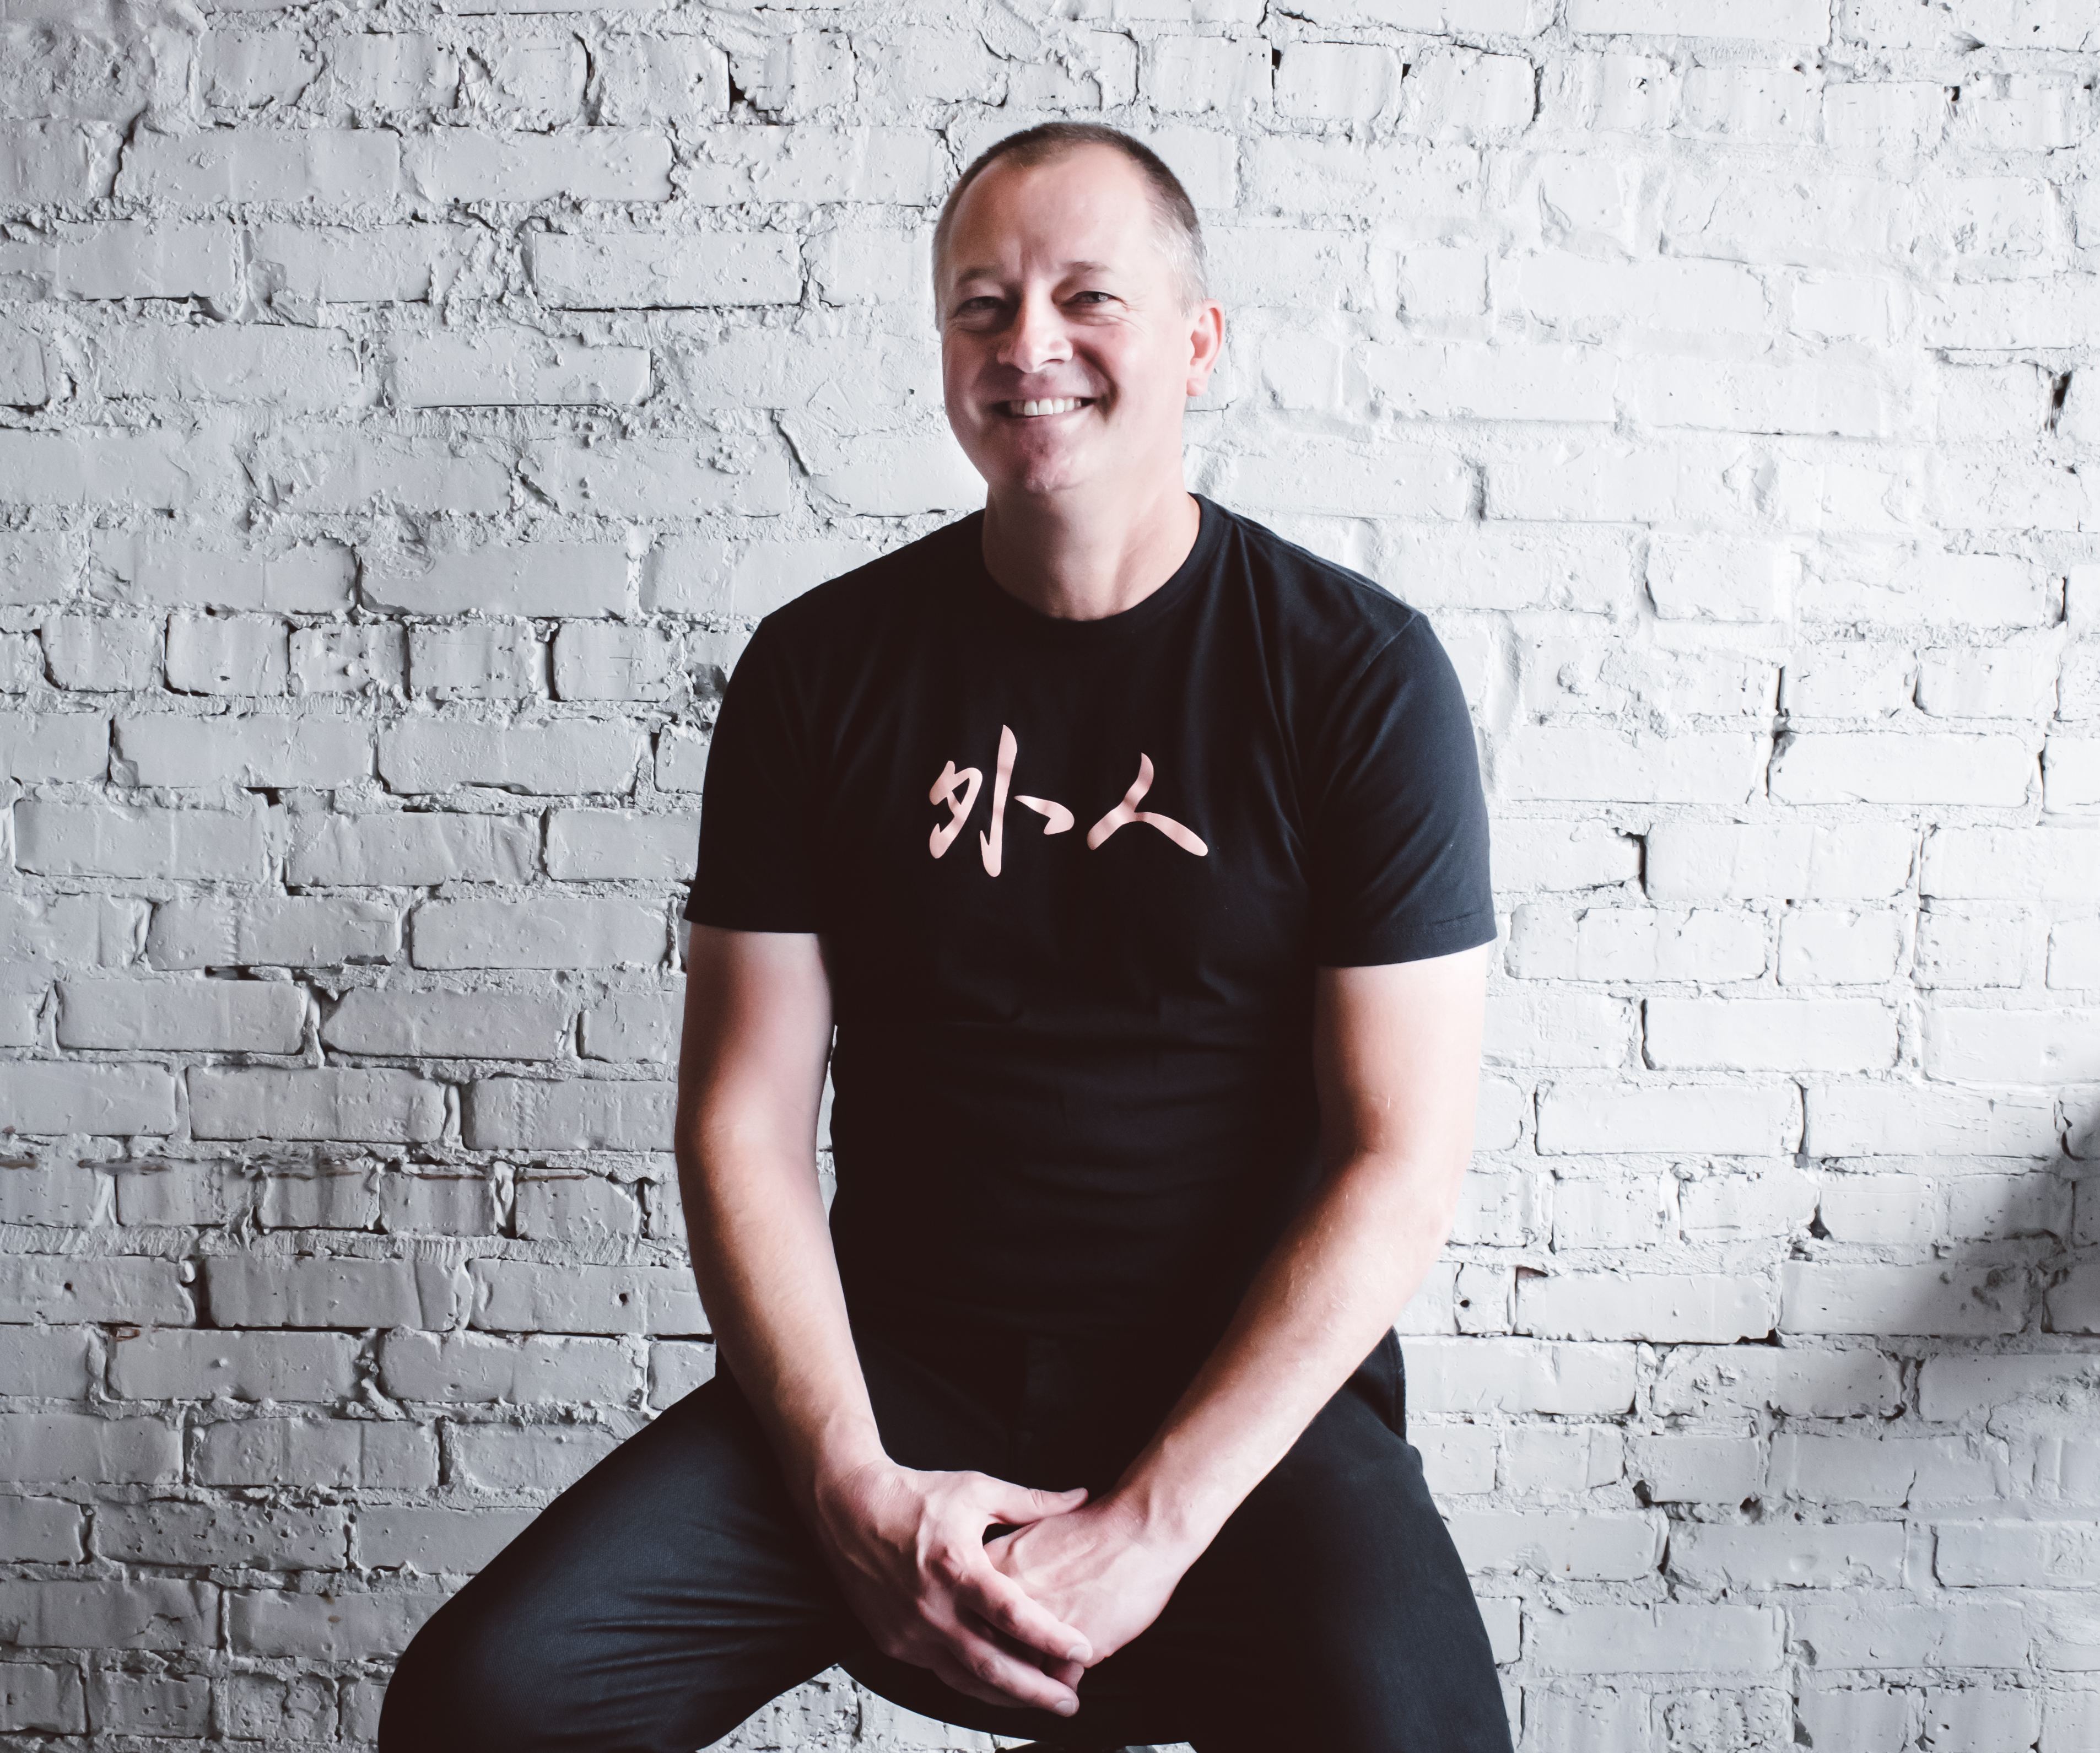 A portrait of a chef wearing a black T-shirt and jeans.